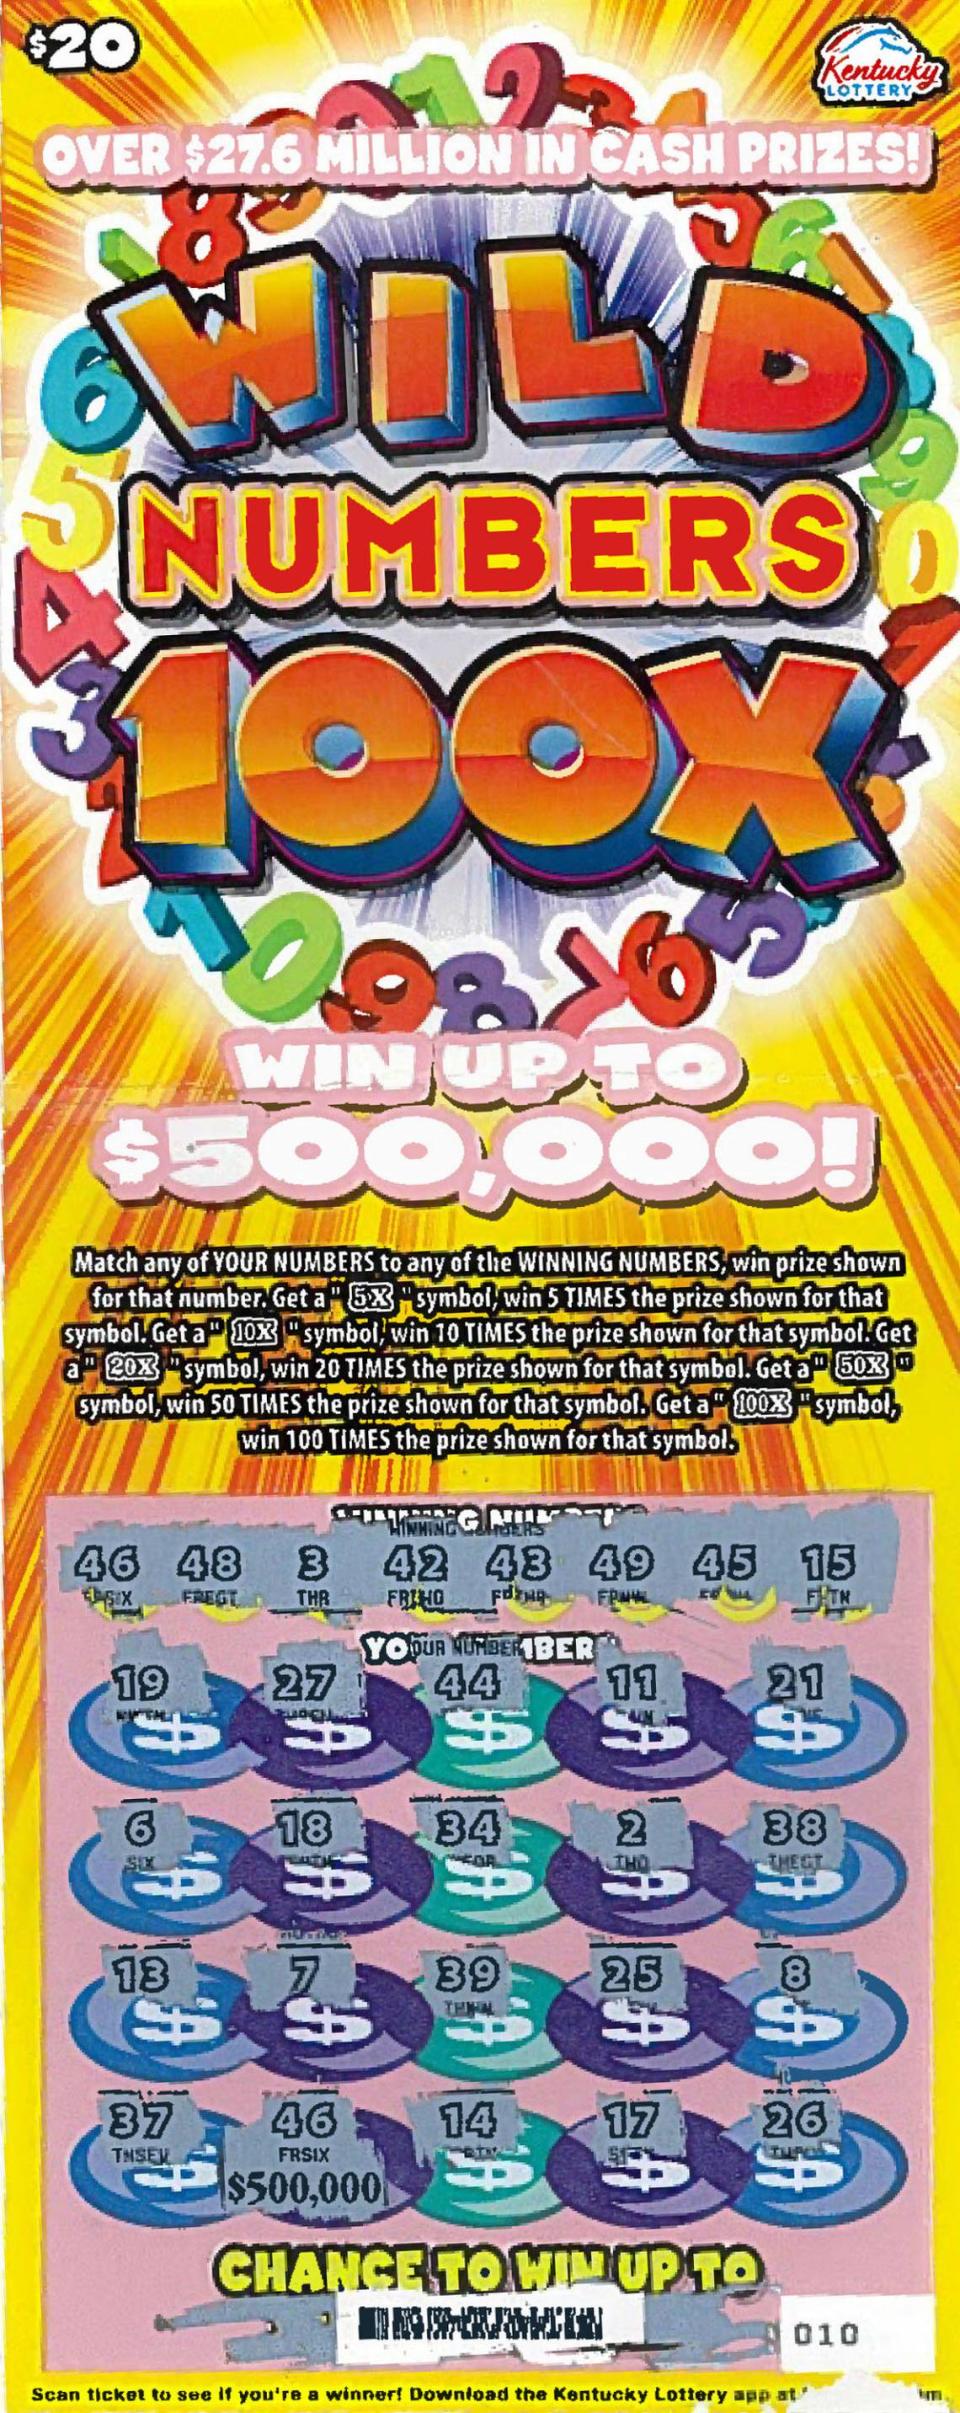 This Break Fort Know scratch-off ticket proved to be a winner recently for the Lexington man playing the Kentucky Lottery.